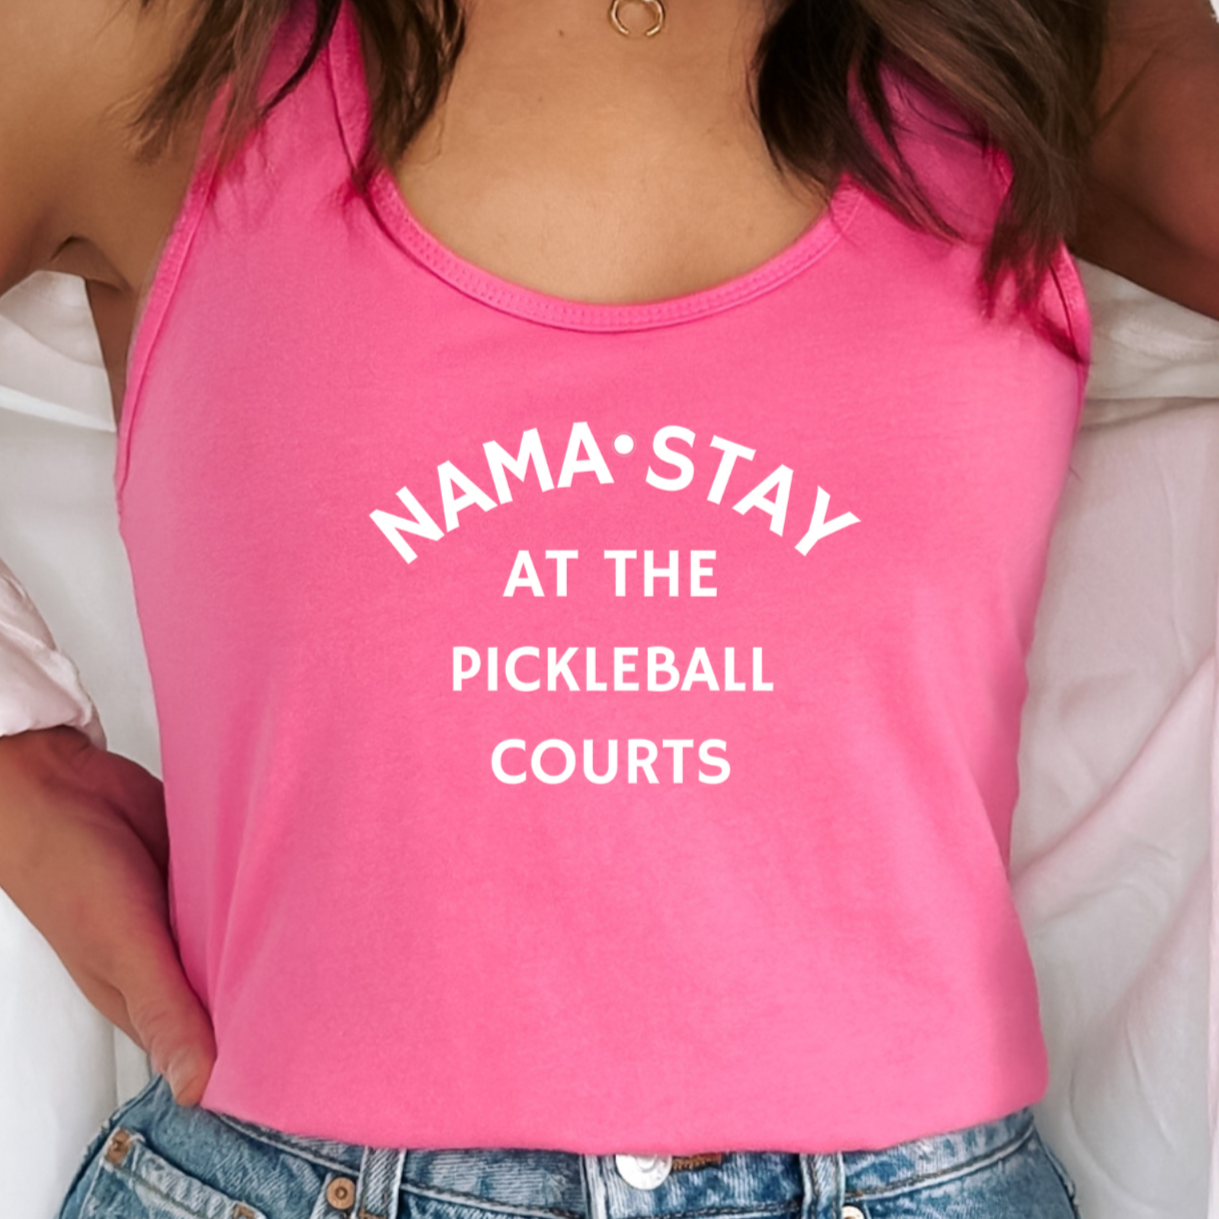 Super cute witty Nama Stay At The Pickleball Courts. Women's Racerback Tank Top